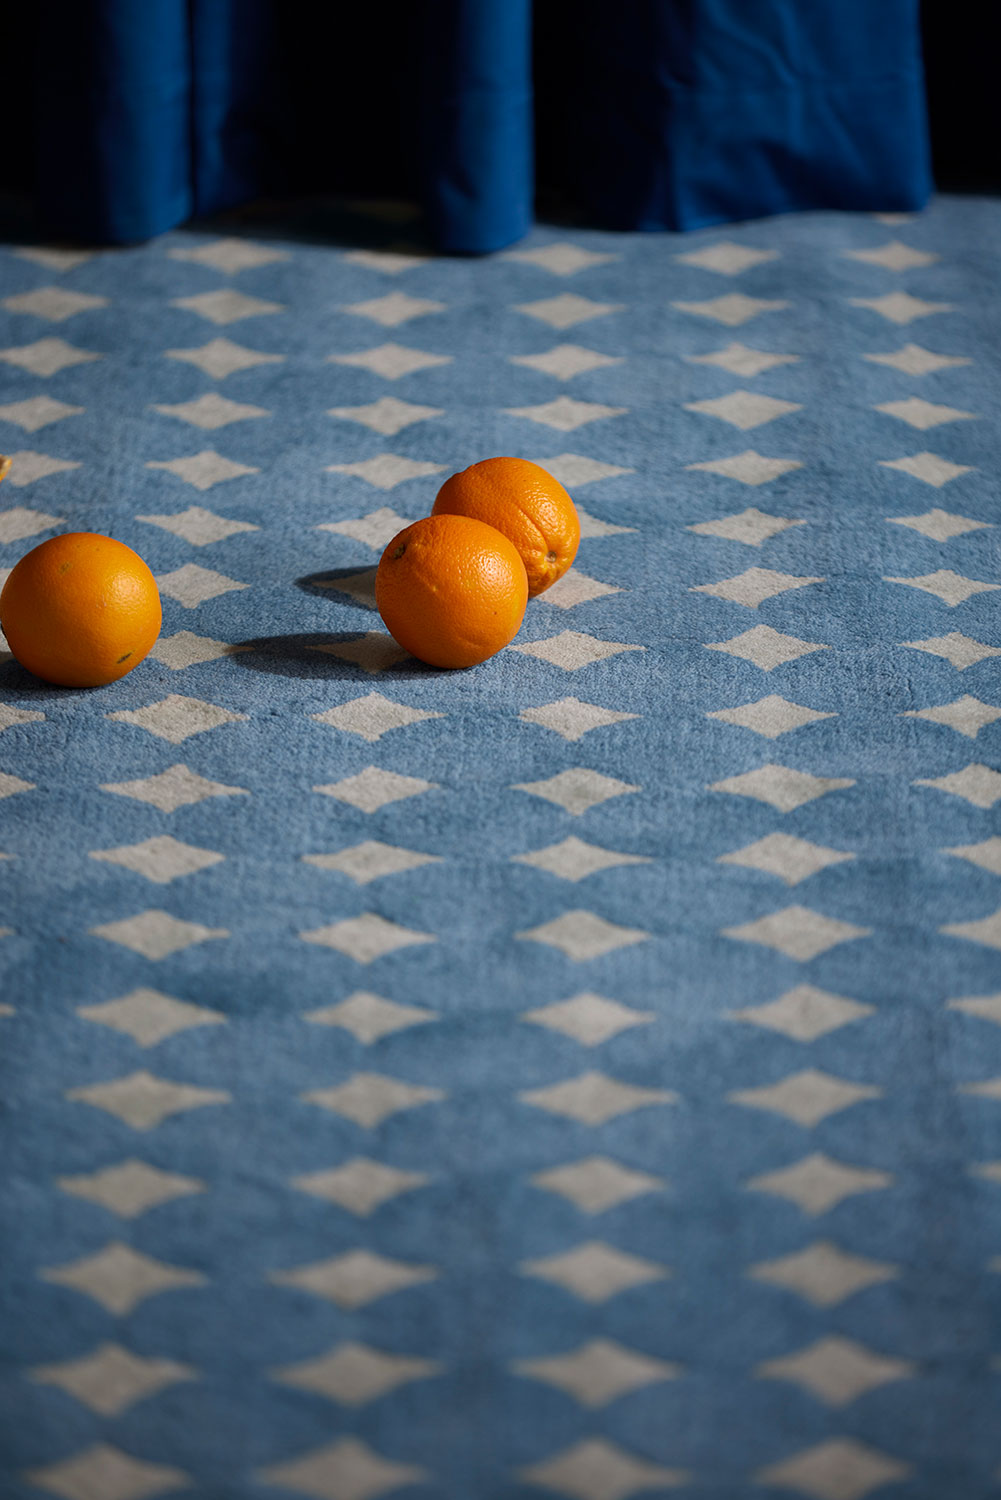 Another close up of oranges rolling on a blue area rug called Bongo Pool